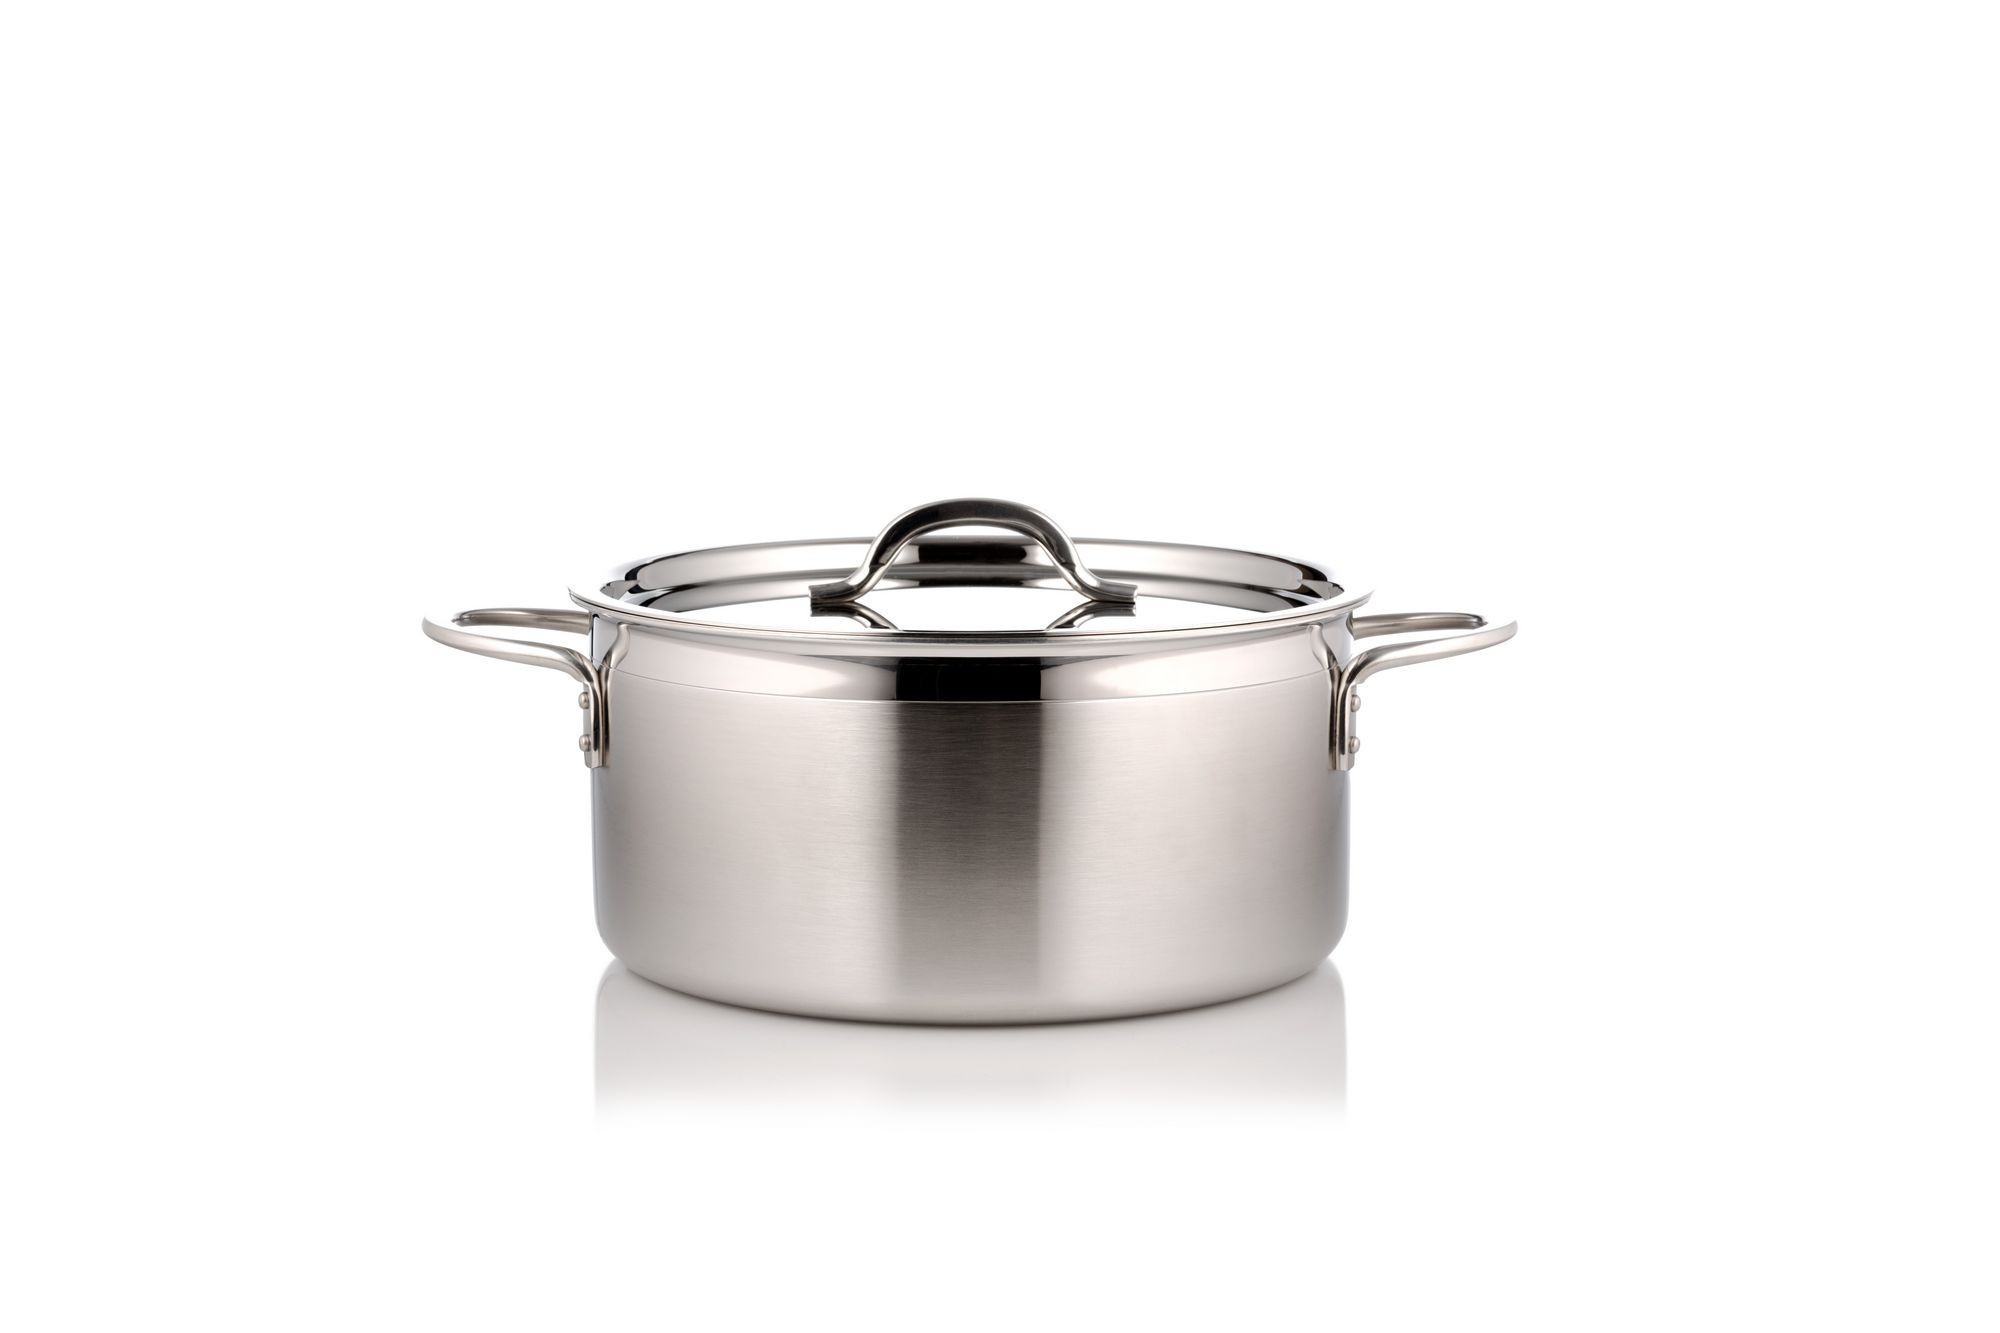 Bon Chef 60302-2ToneSS Country French Two Tone Stainless Steel Pot with Cover, 4 Qt. 9 oz.